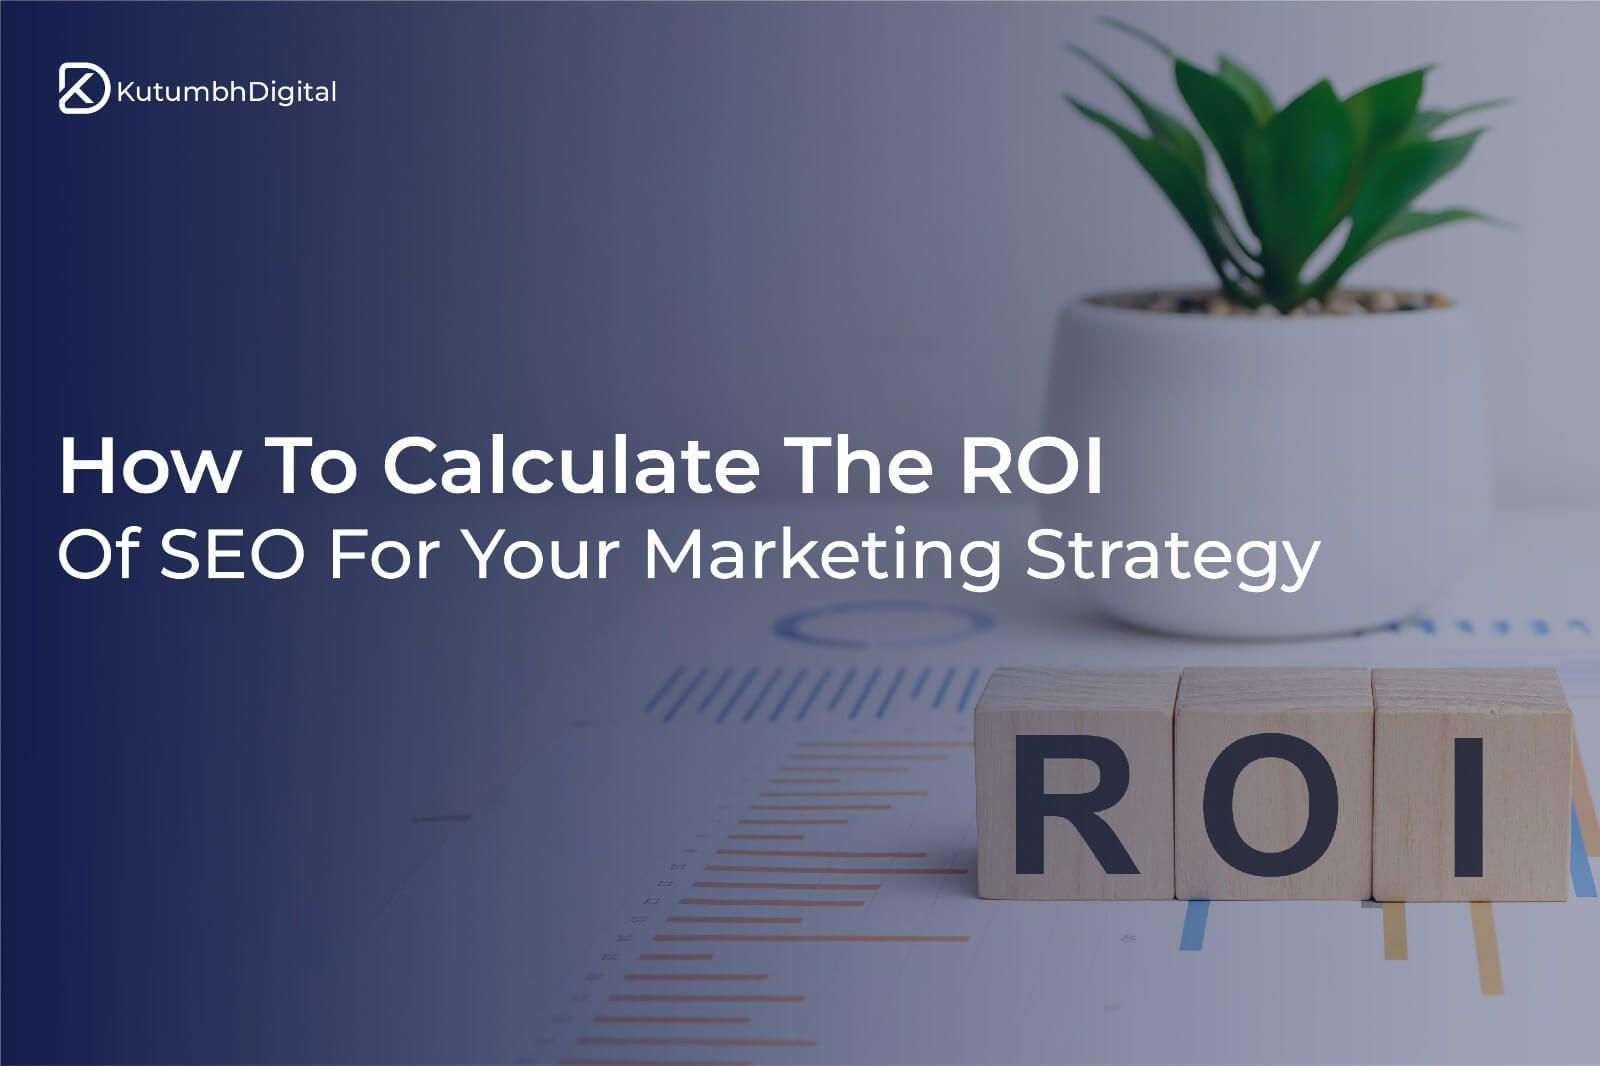 How to Calculate the ROI of SEO for Your Marketing Strategy?